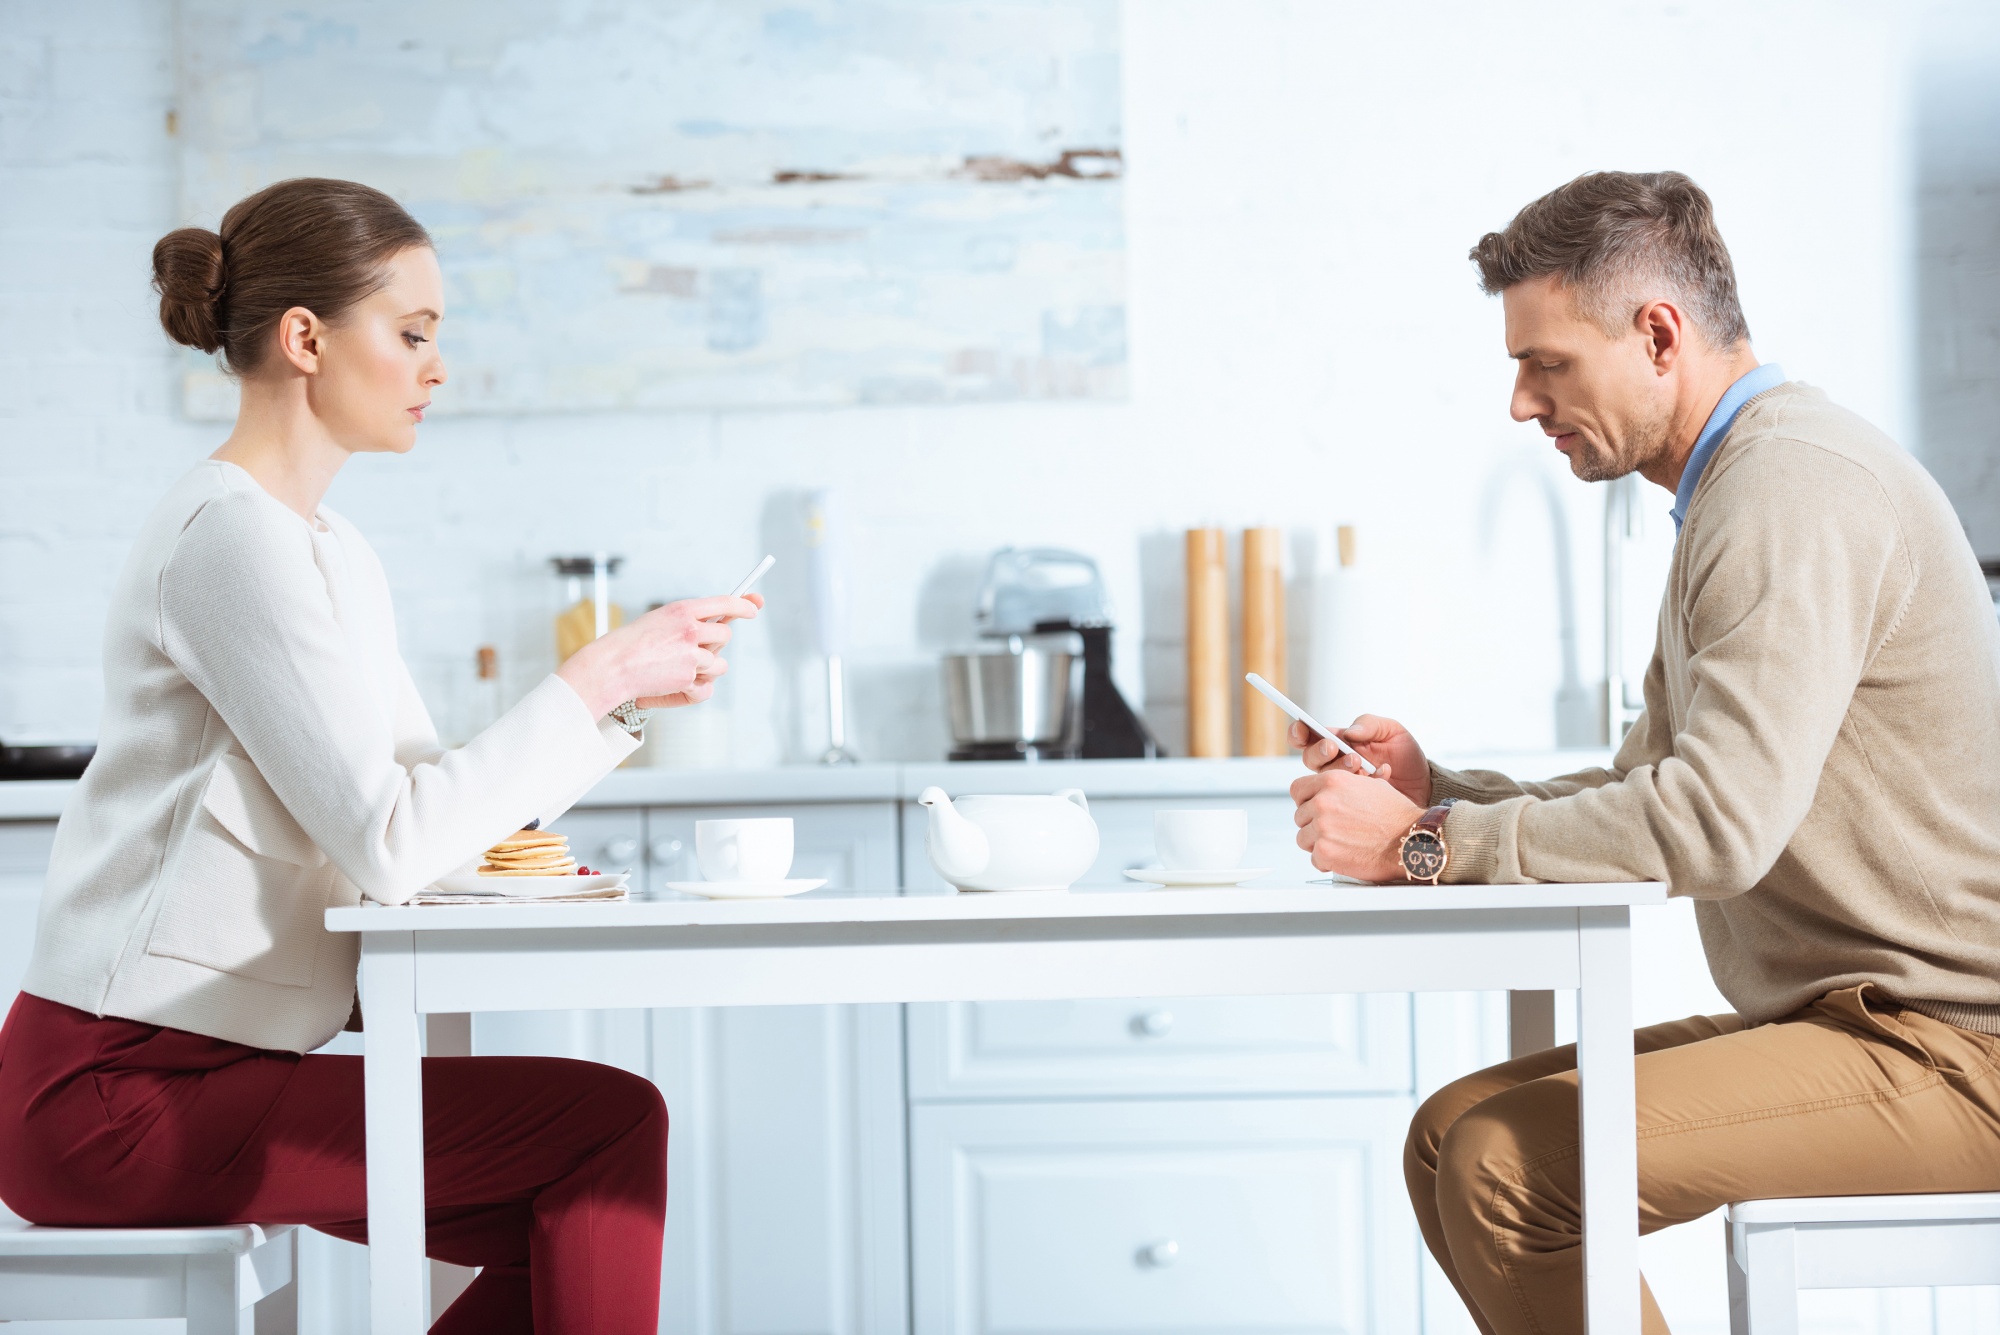 Toxic relationship habits, couple sitting at kitchen table ignoring each other and focusing on their cell phones